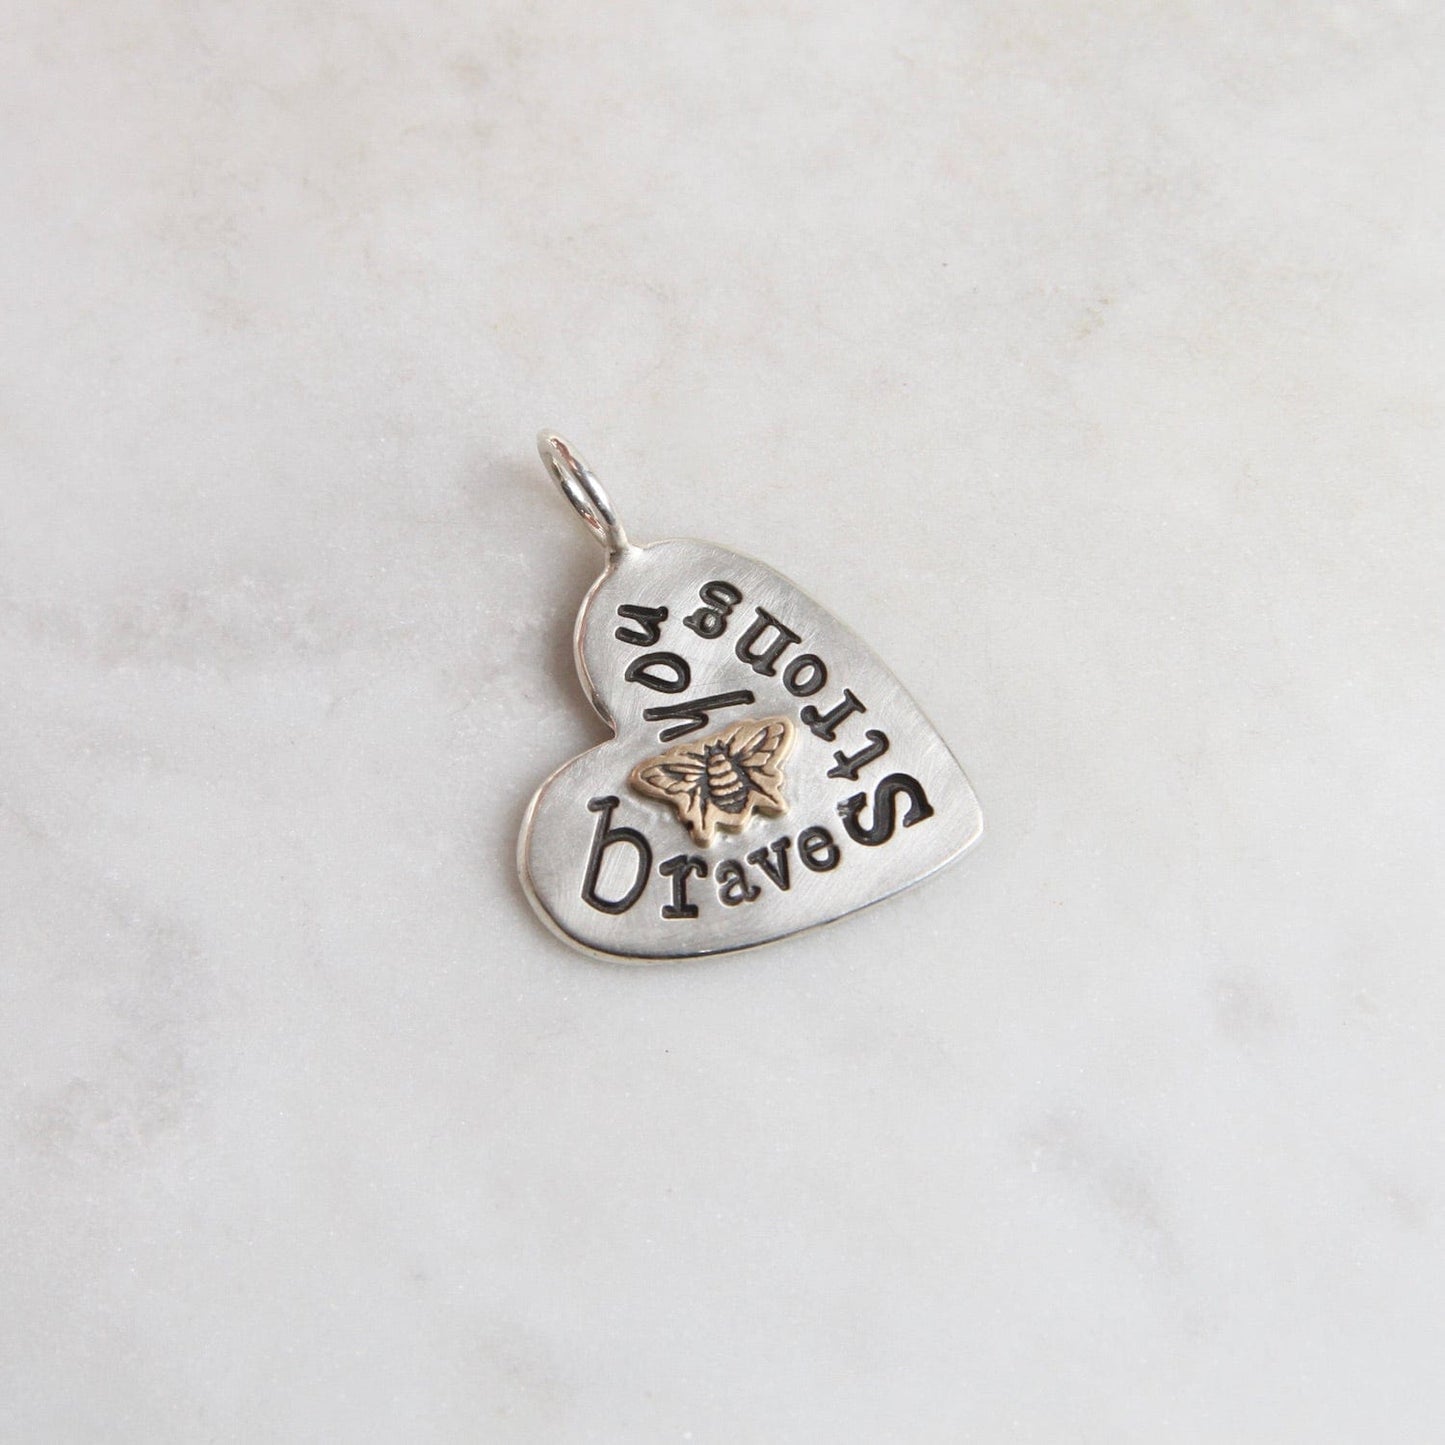 CHM "You, Brave, Strong" Silver Heart with Gold Bee Charm